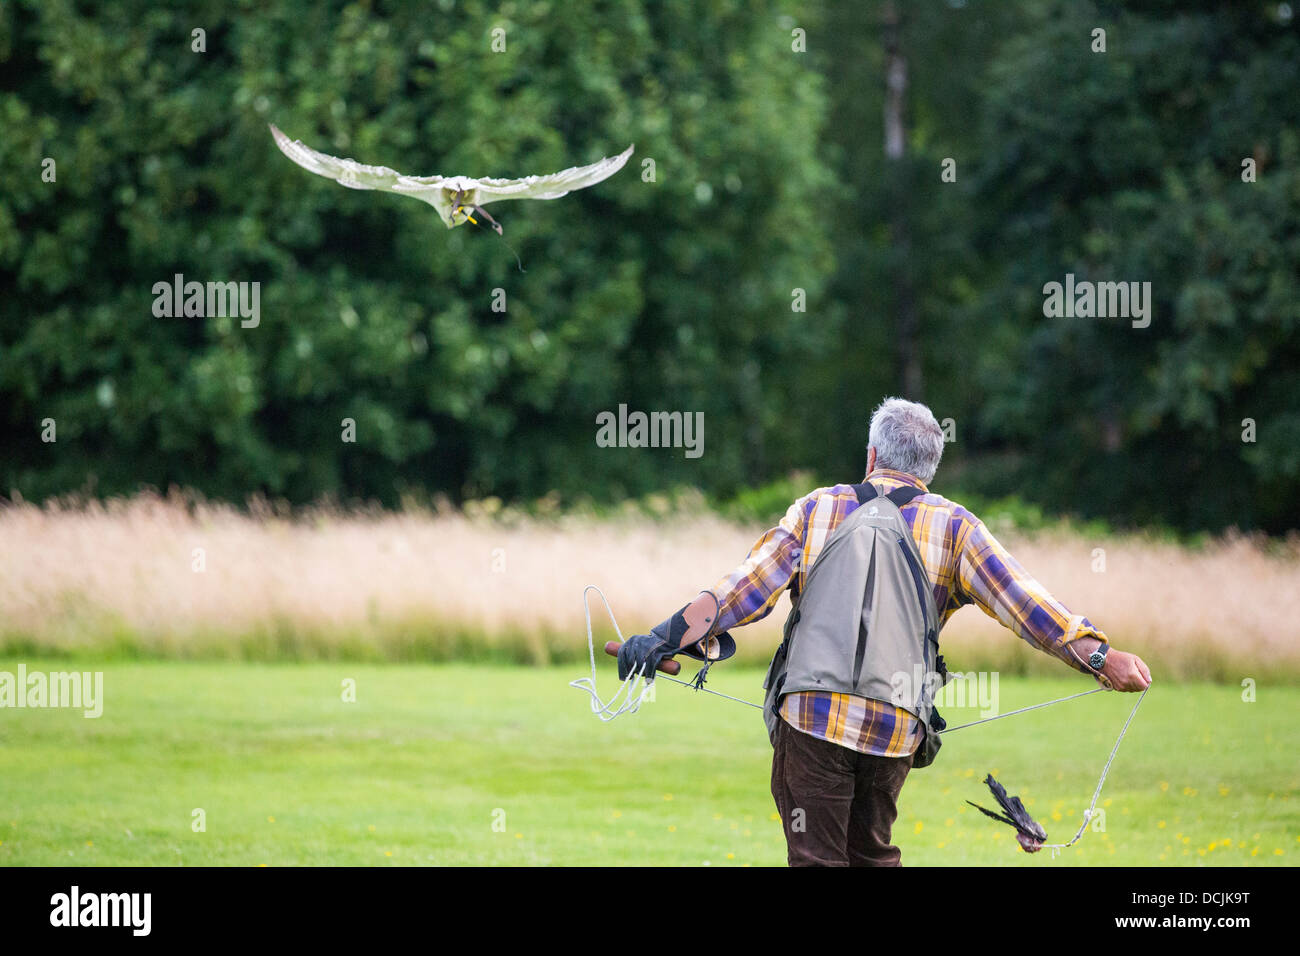 A falconry display at Lowther Bird of Prey Centre, near Penrith, Cumbria, UK, Stock Photo